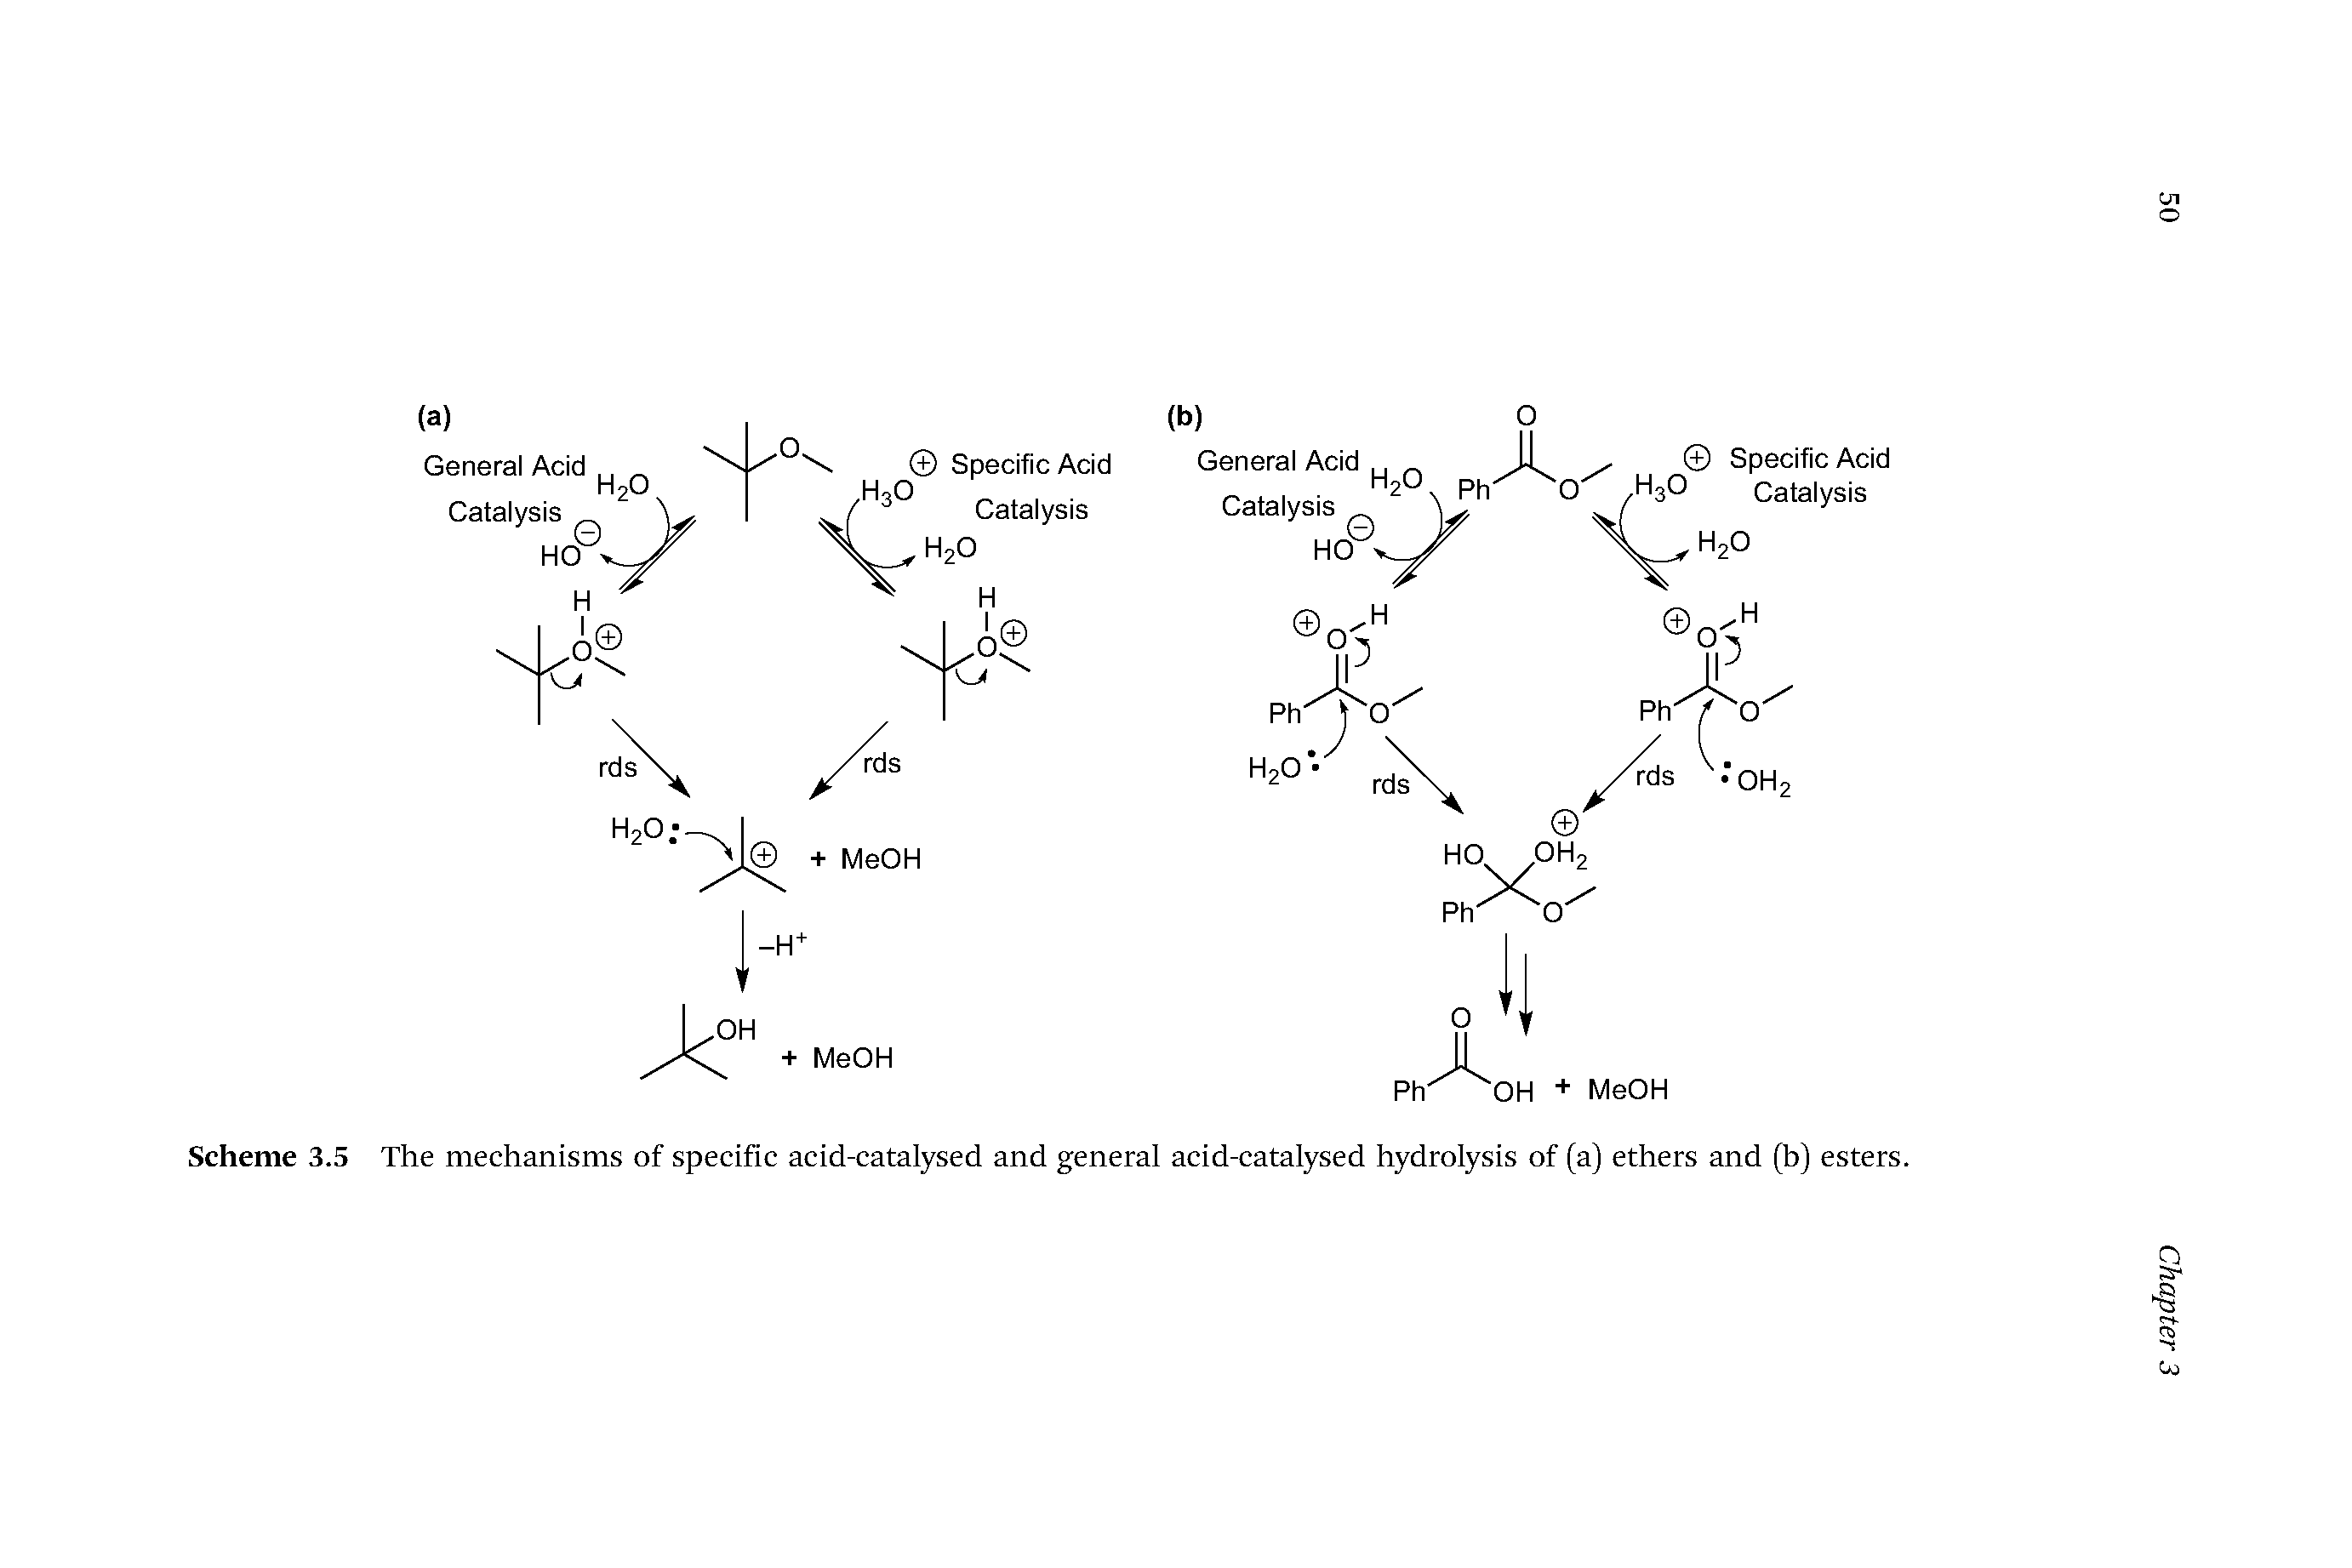 Scheme 3.5 The mechanisms of specific acid-catalysed and general acid-catalysed hydrolysis of (a) ethers and (b) esters.